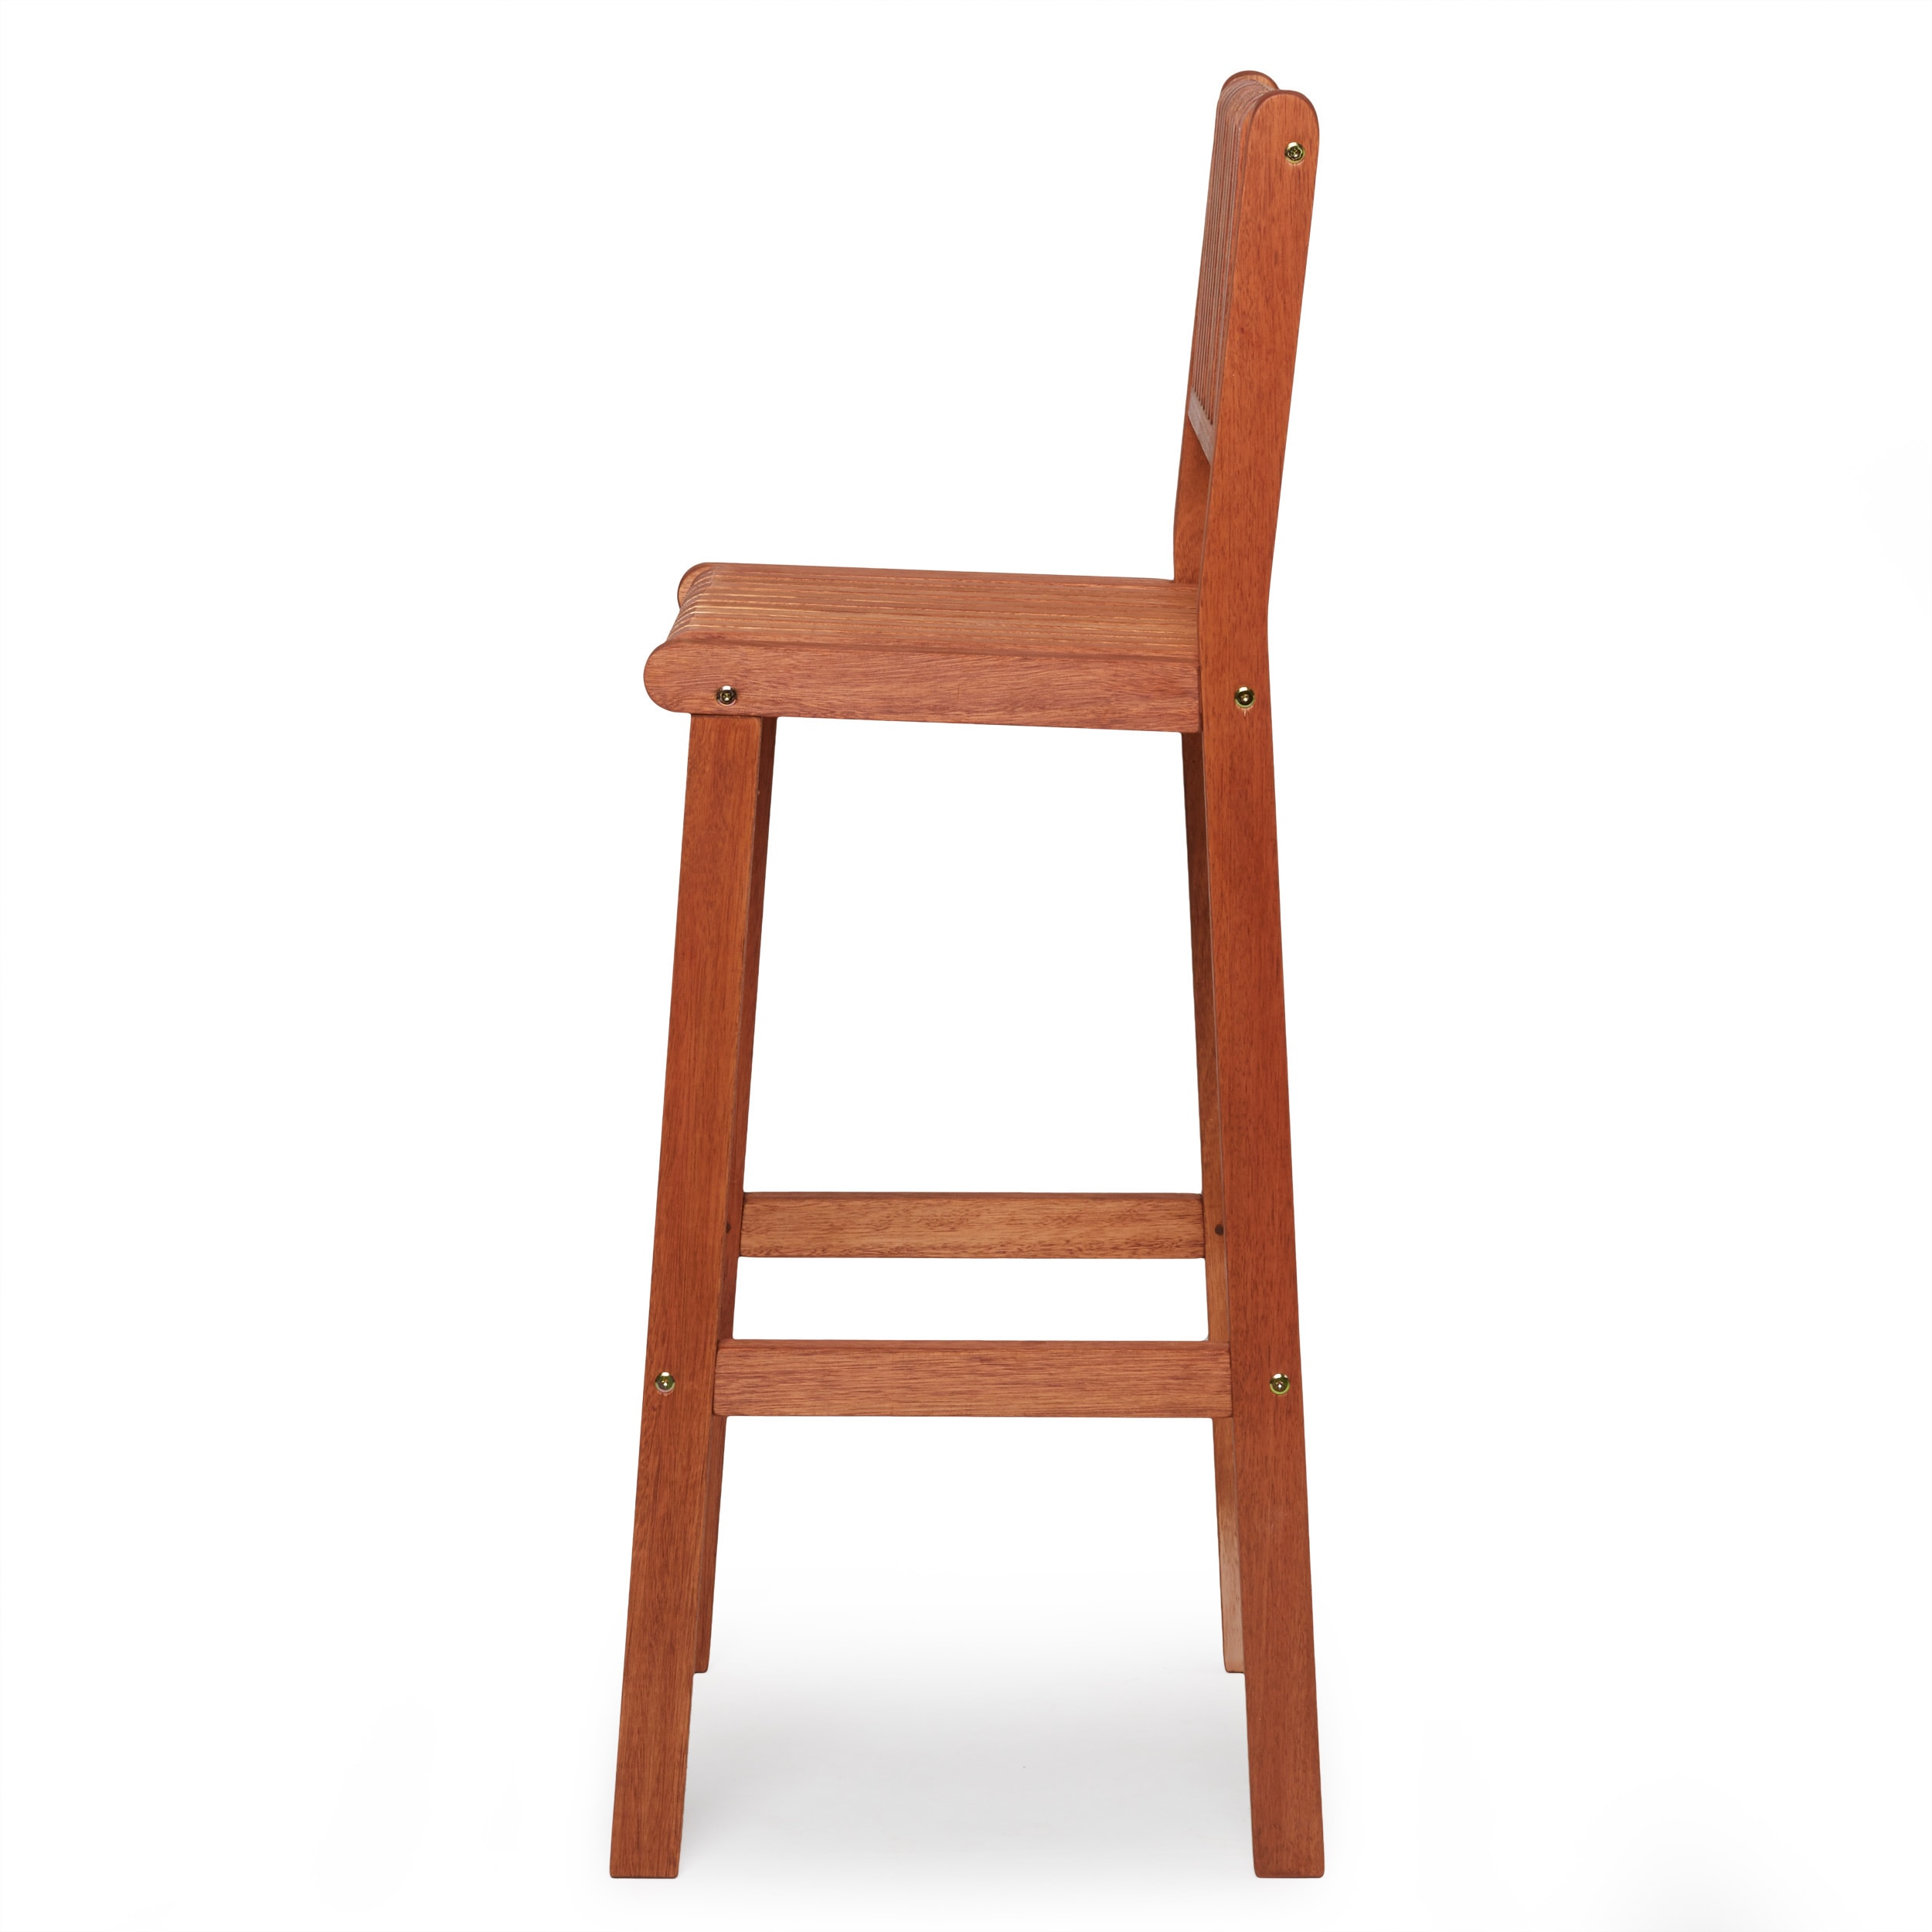 Amazonia Milano 1-Piece Patio Barstool | Eucalyptus Wood | Ideal for Outdoors and Indoors - image 4 of 8